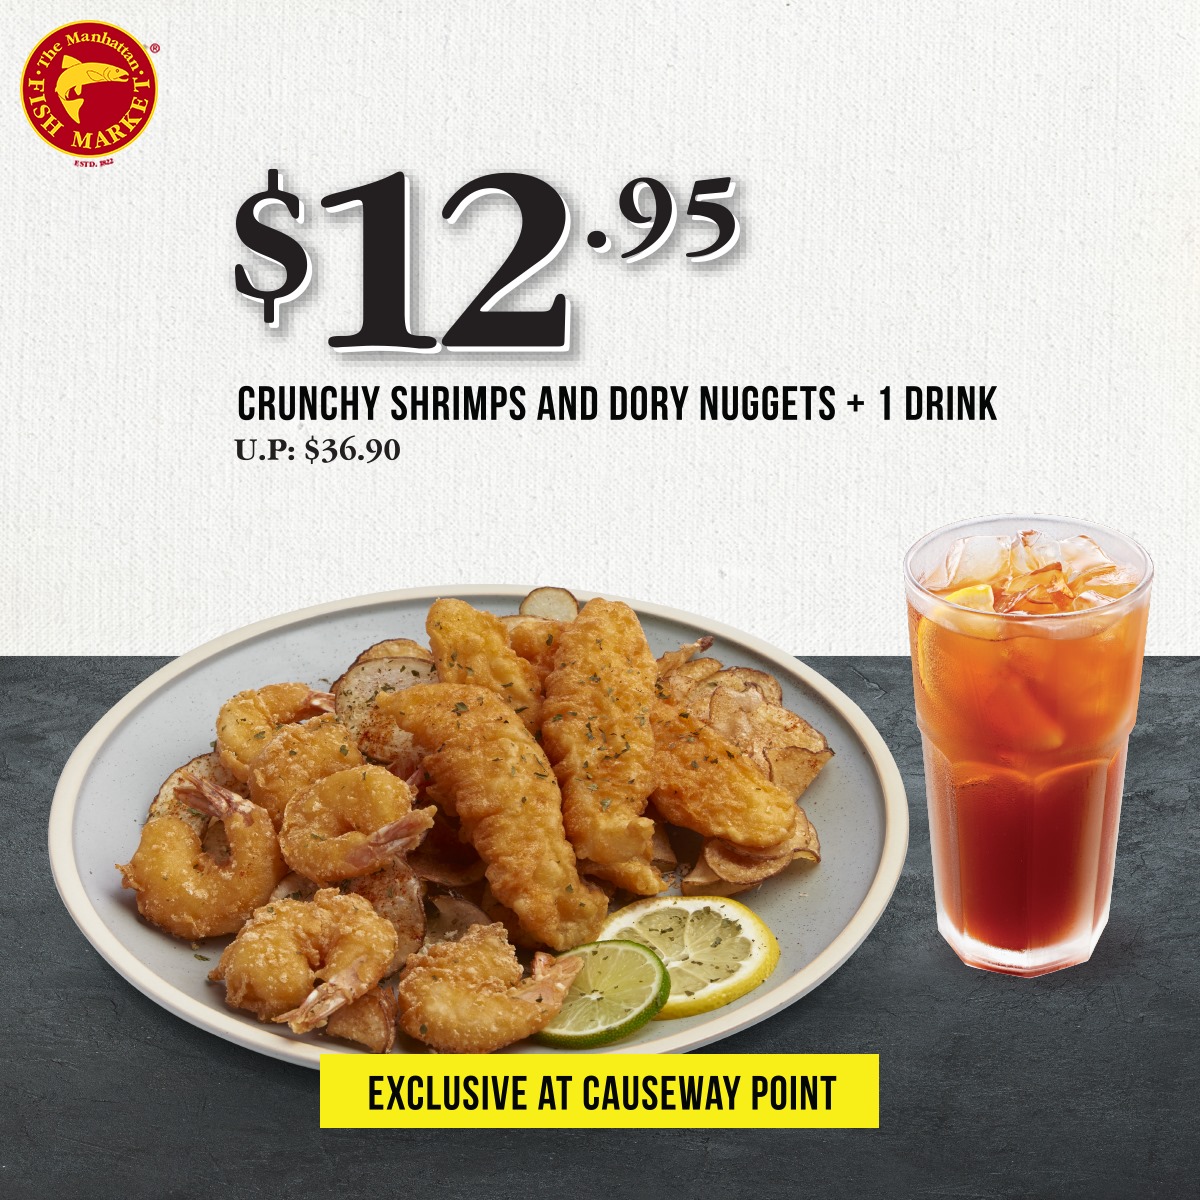 Flash these coupons from The Manhattan FISH MARKET on your mobile devices to enjoy great savings - 11